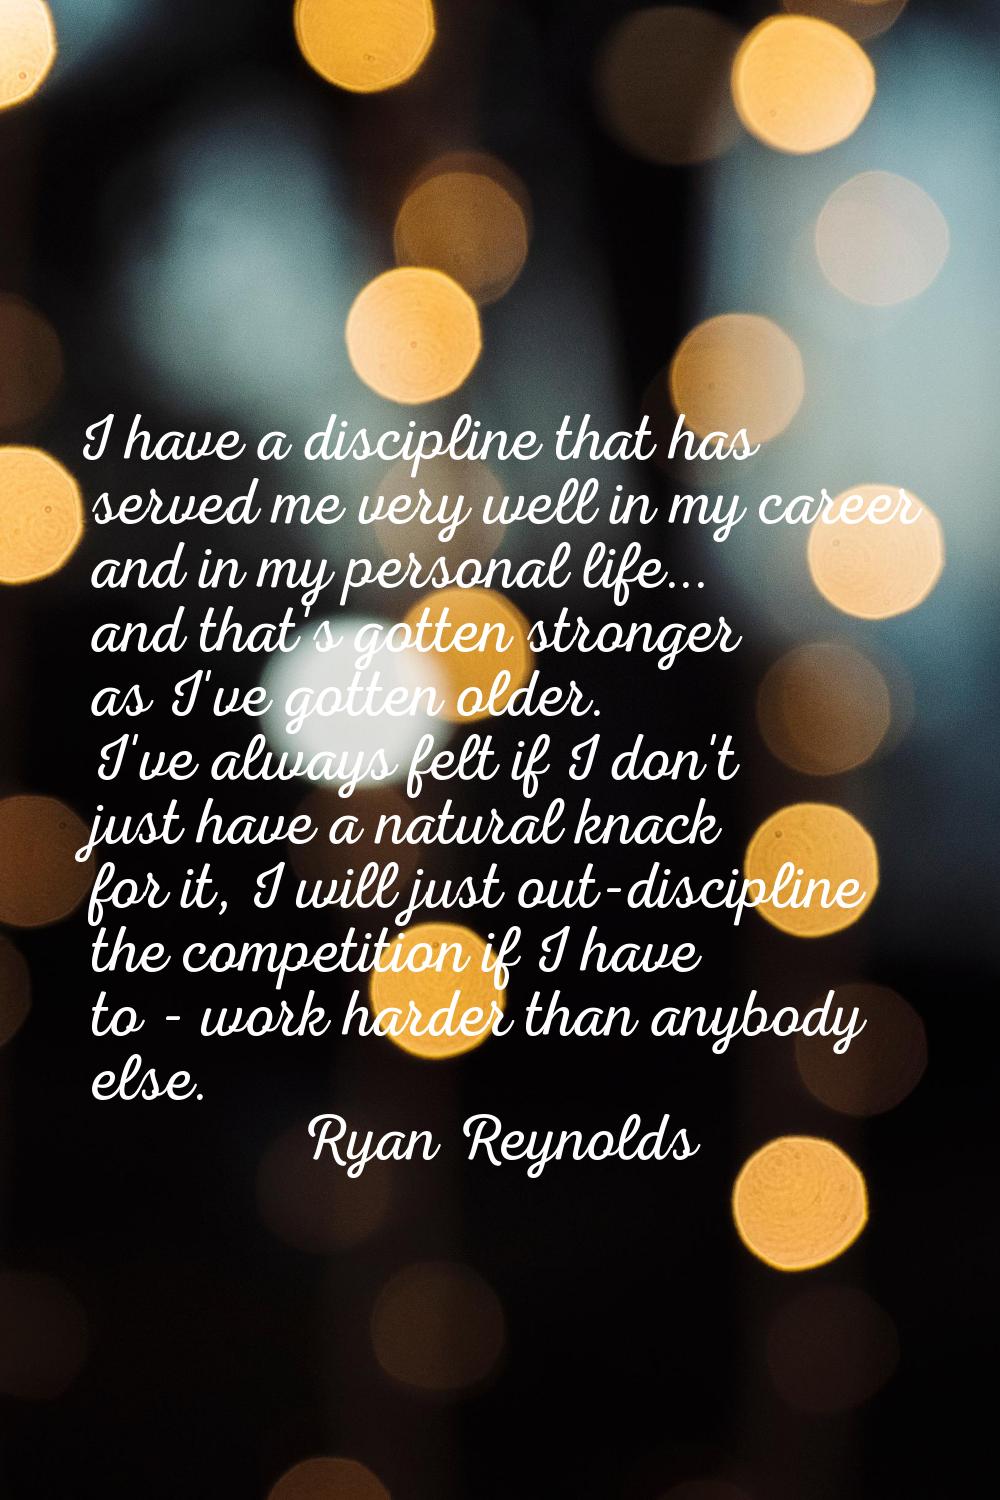 I have a discipline that has served me very well in my career and in my personal life... and that's